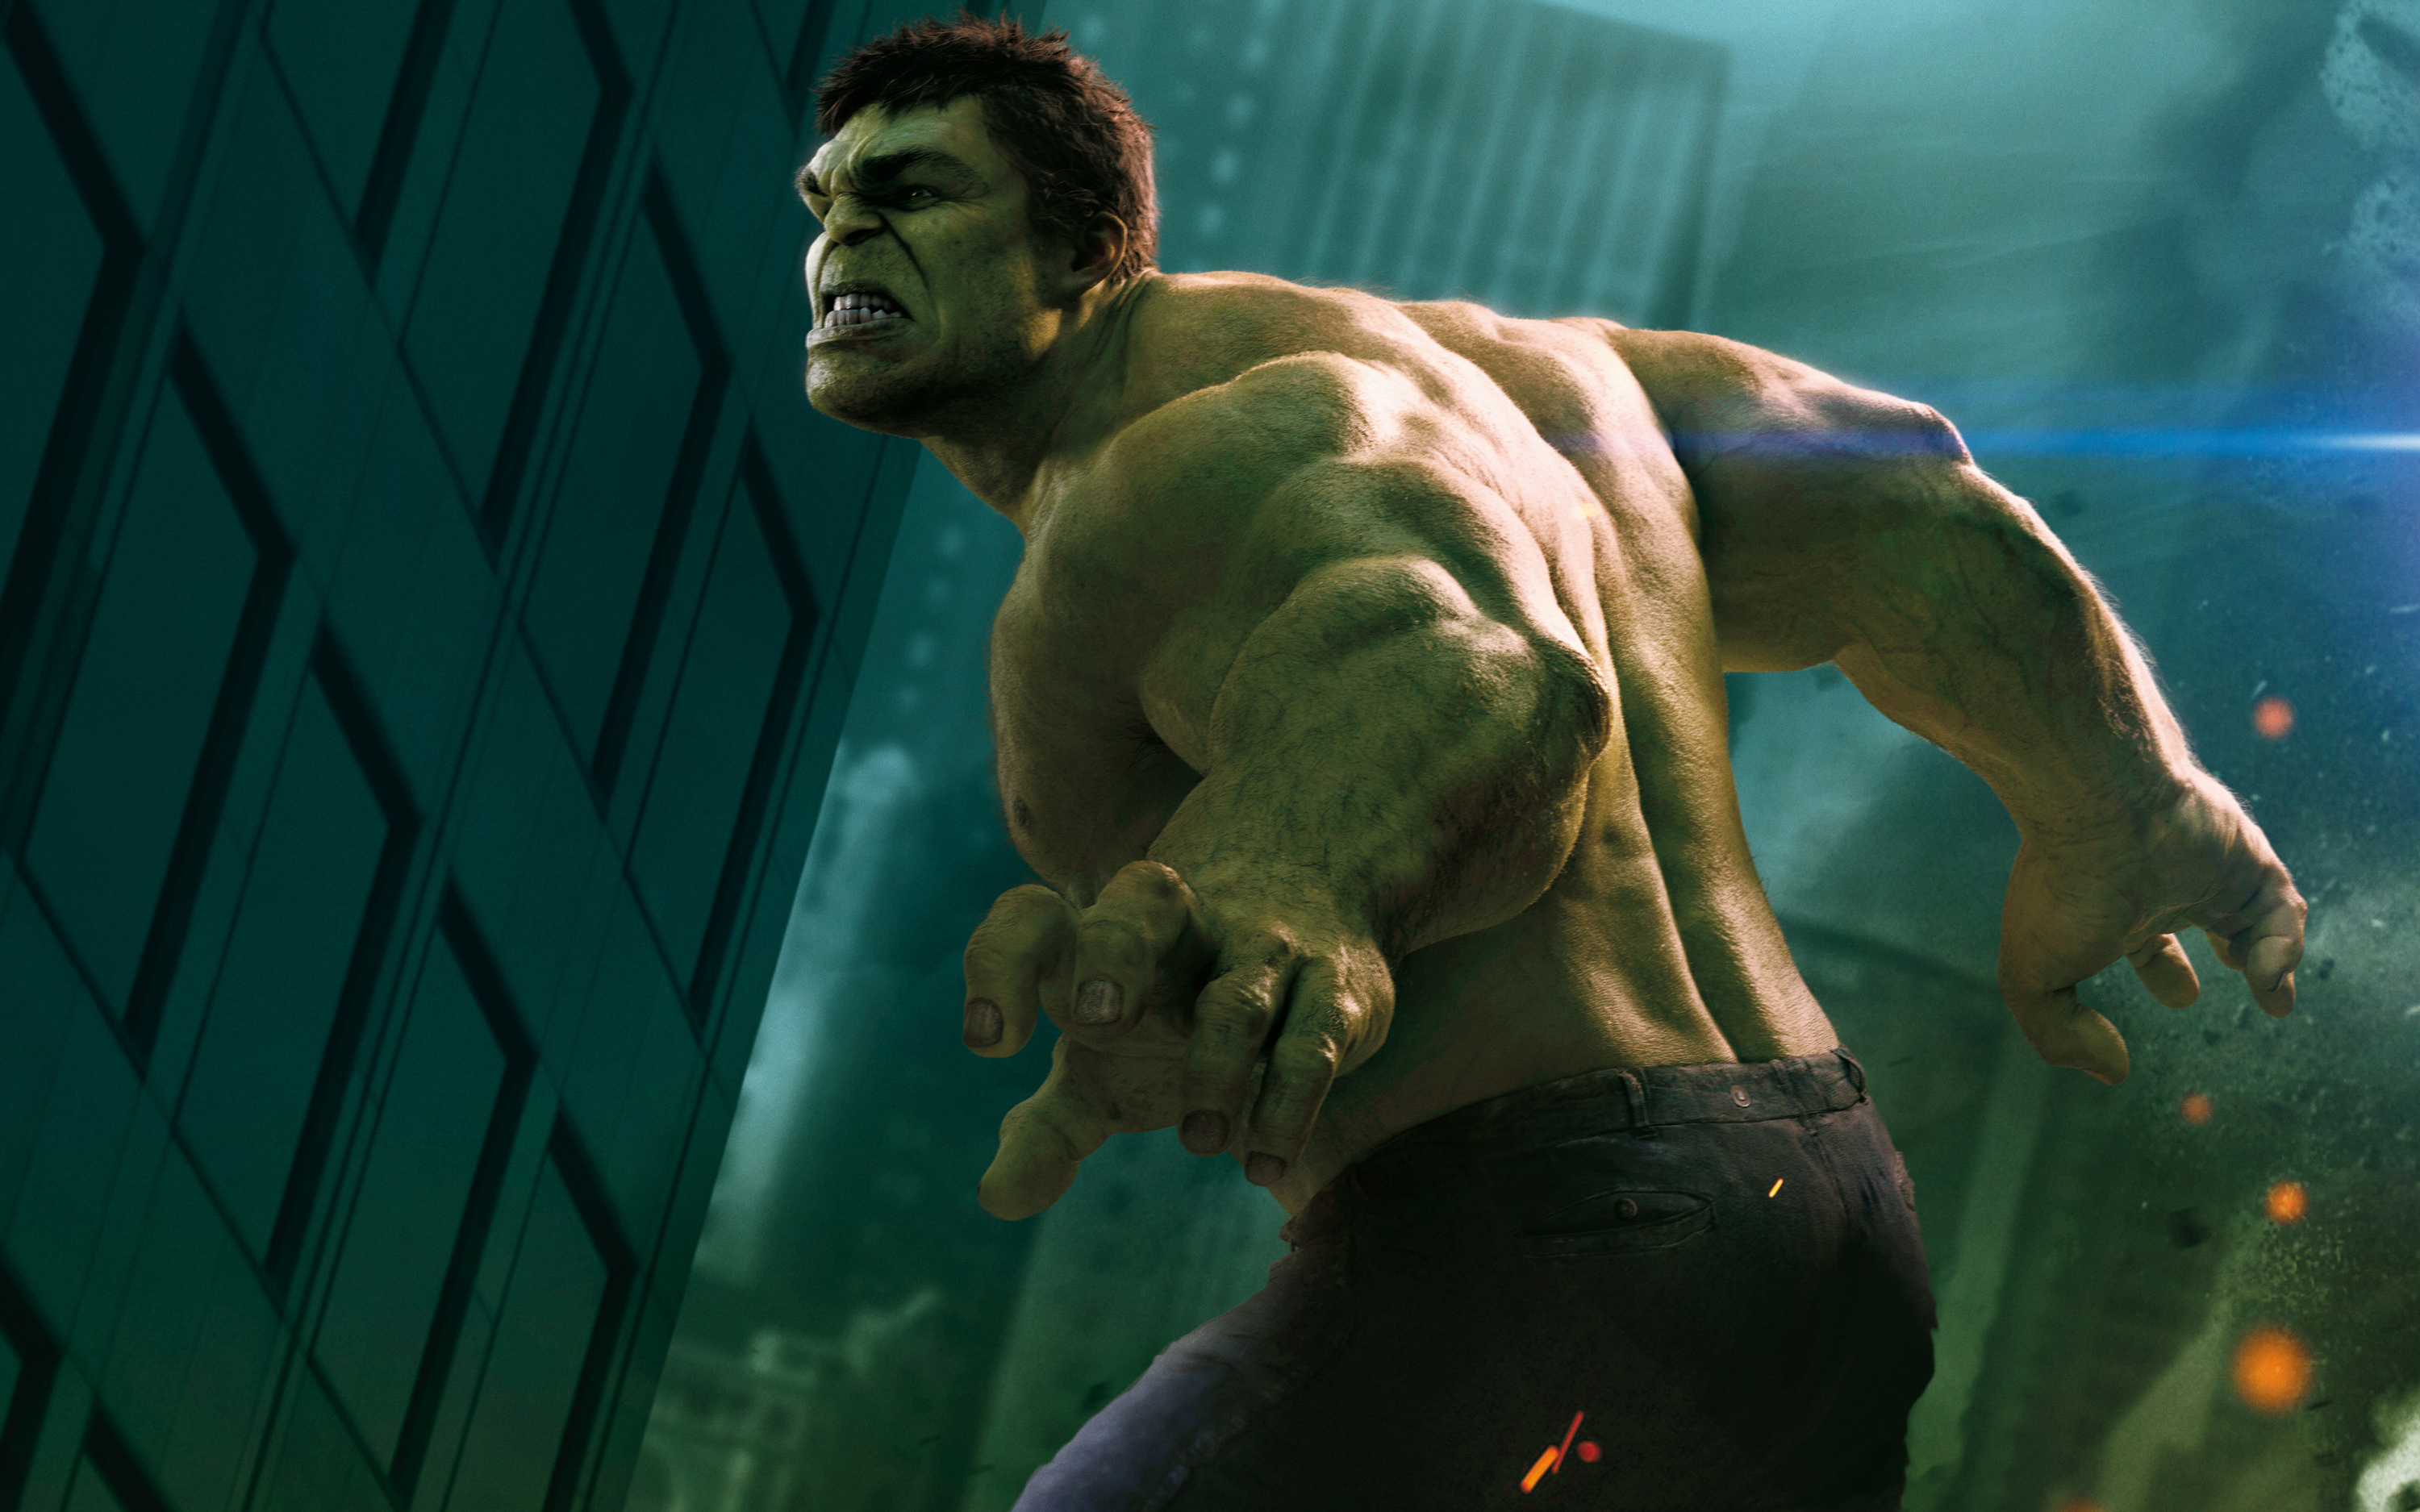 Hulk in the avengers wide backgrounds.